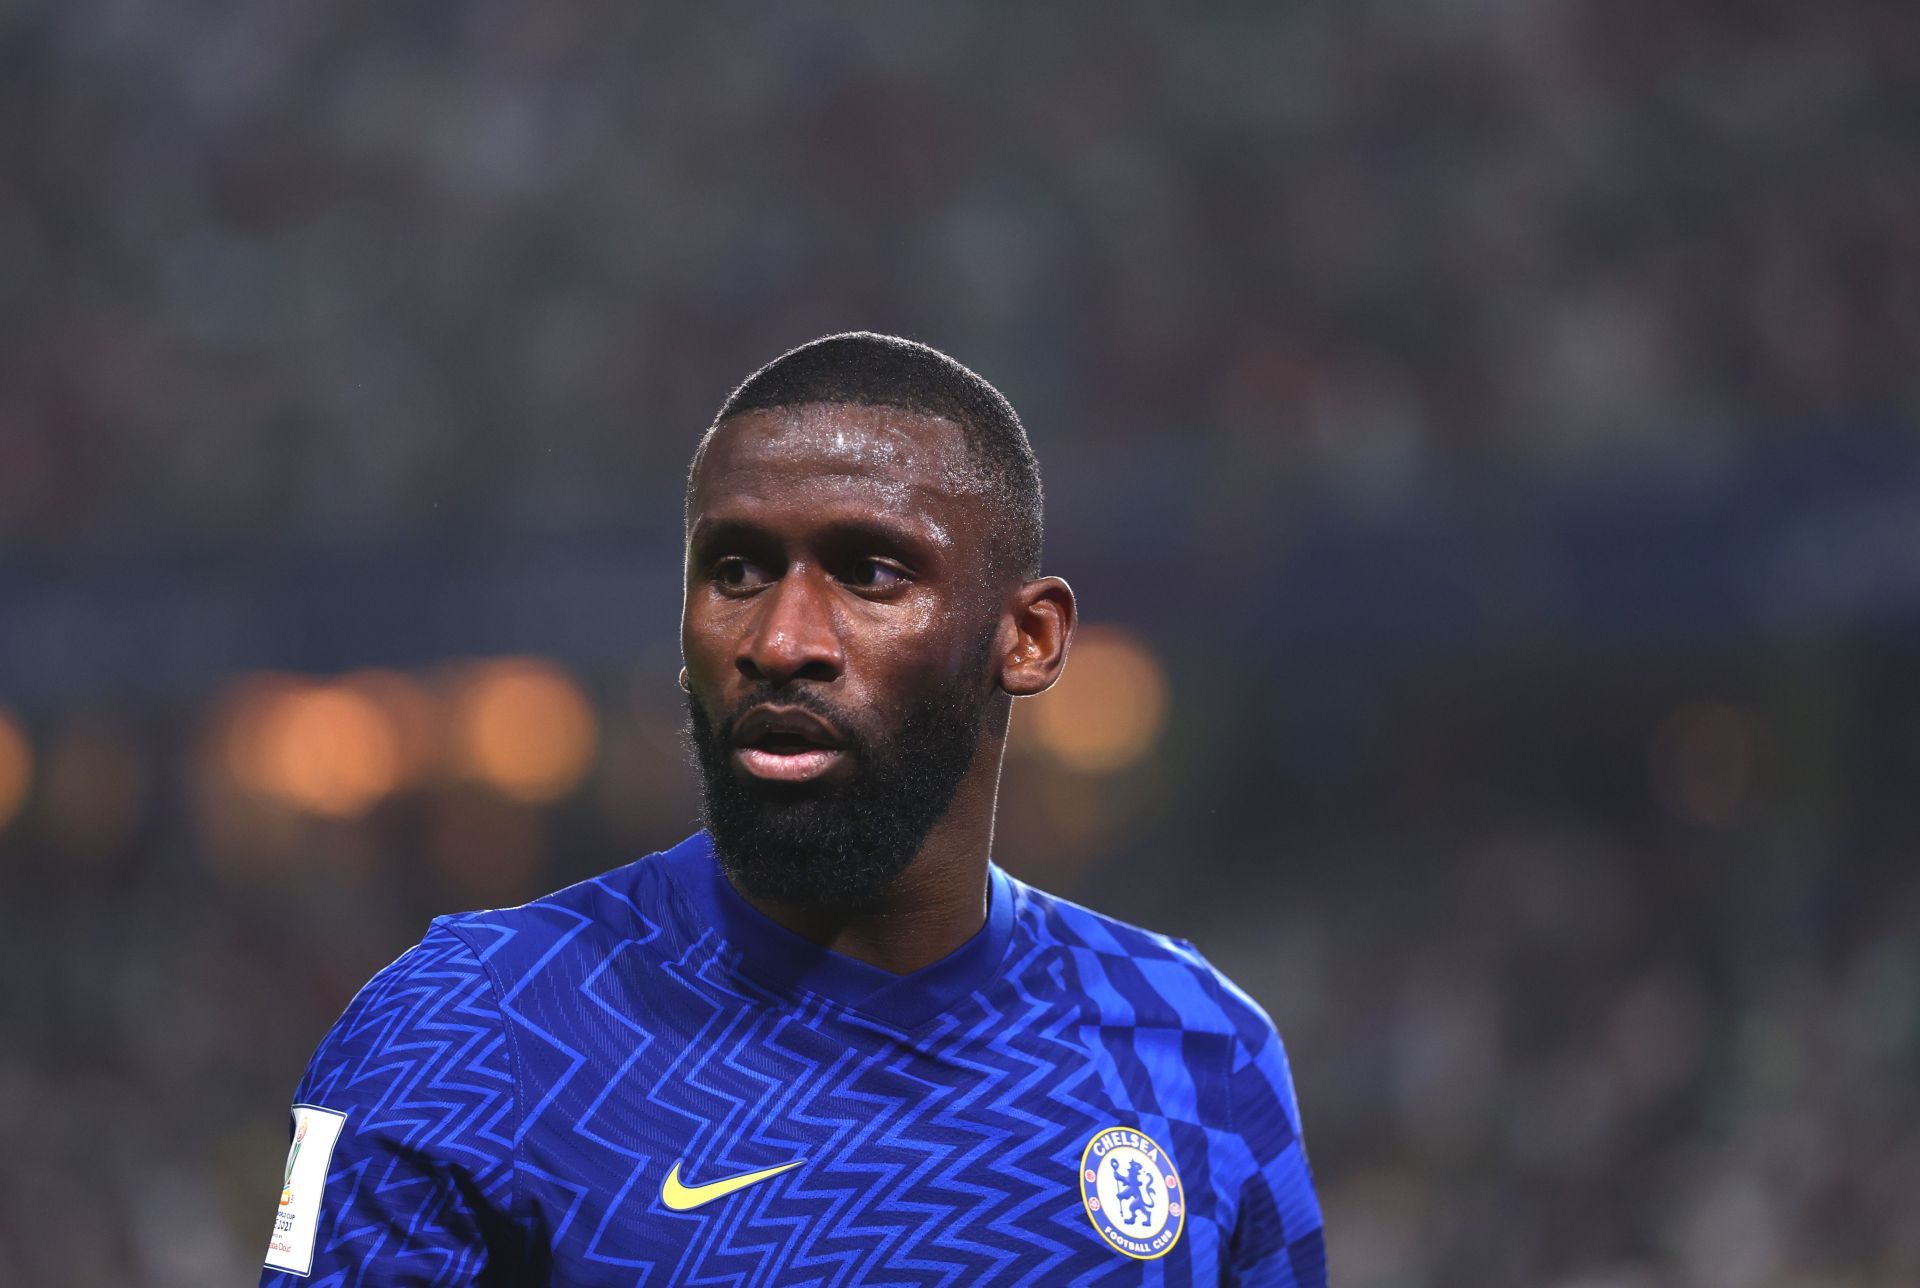 Rudiger has played 47 games for the Blues this season